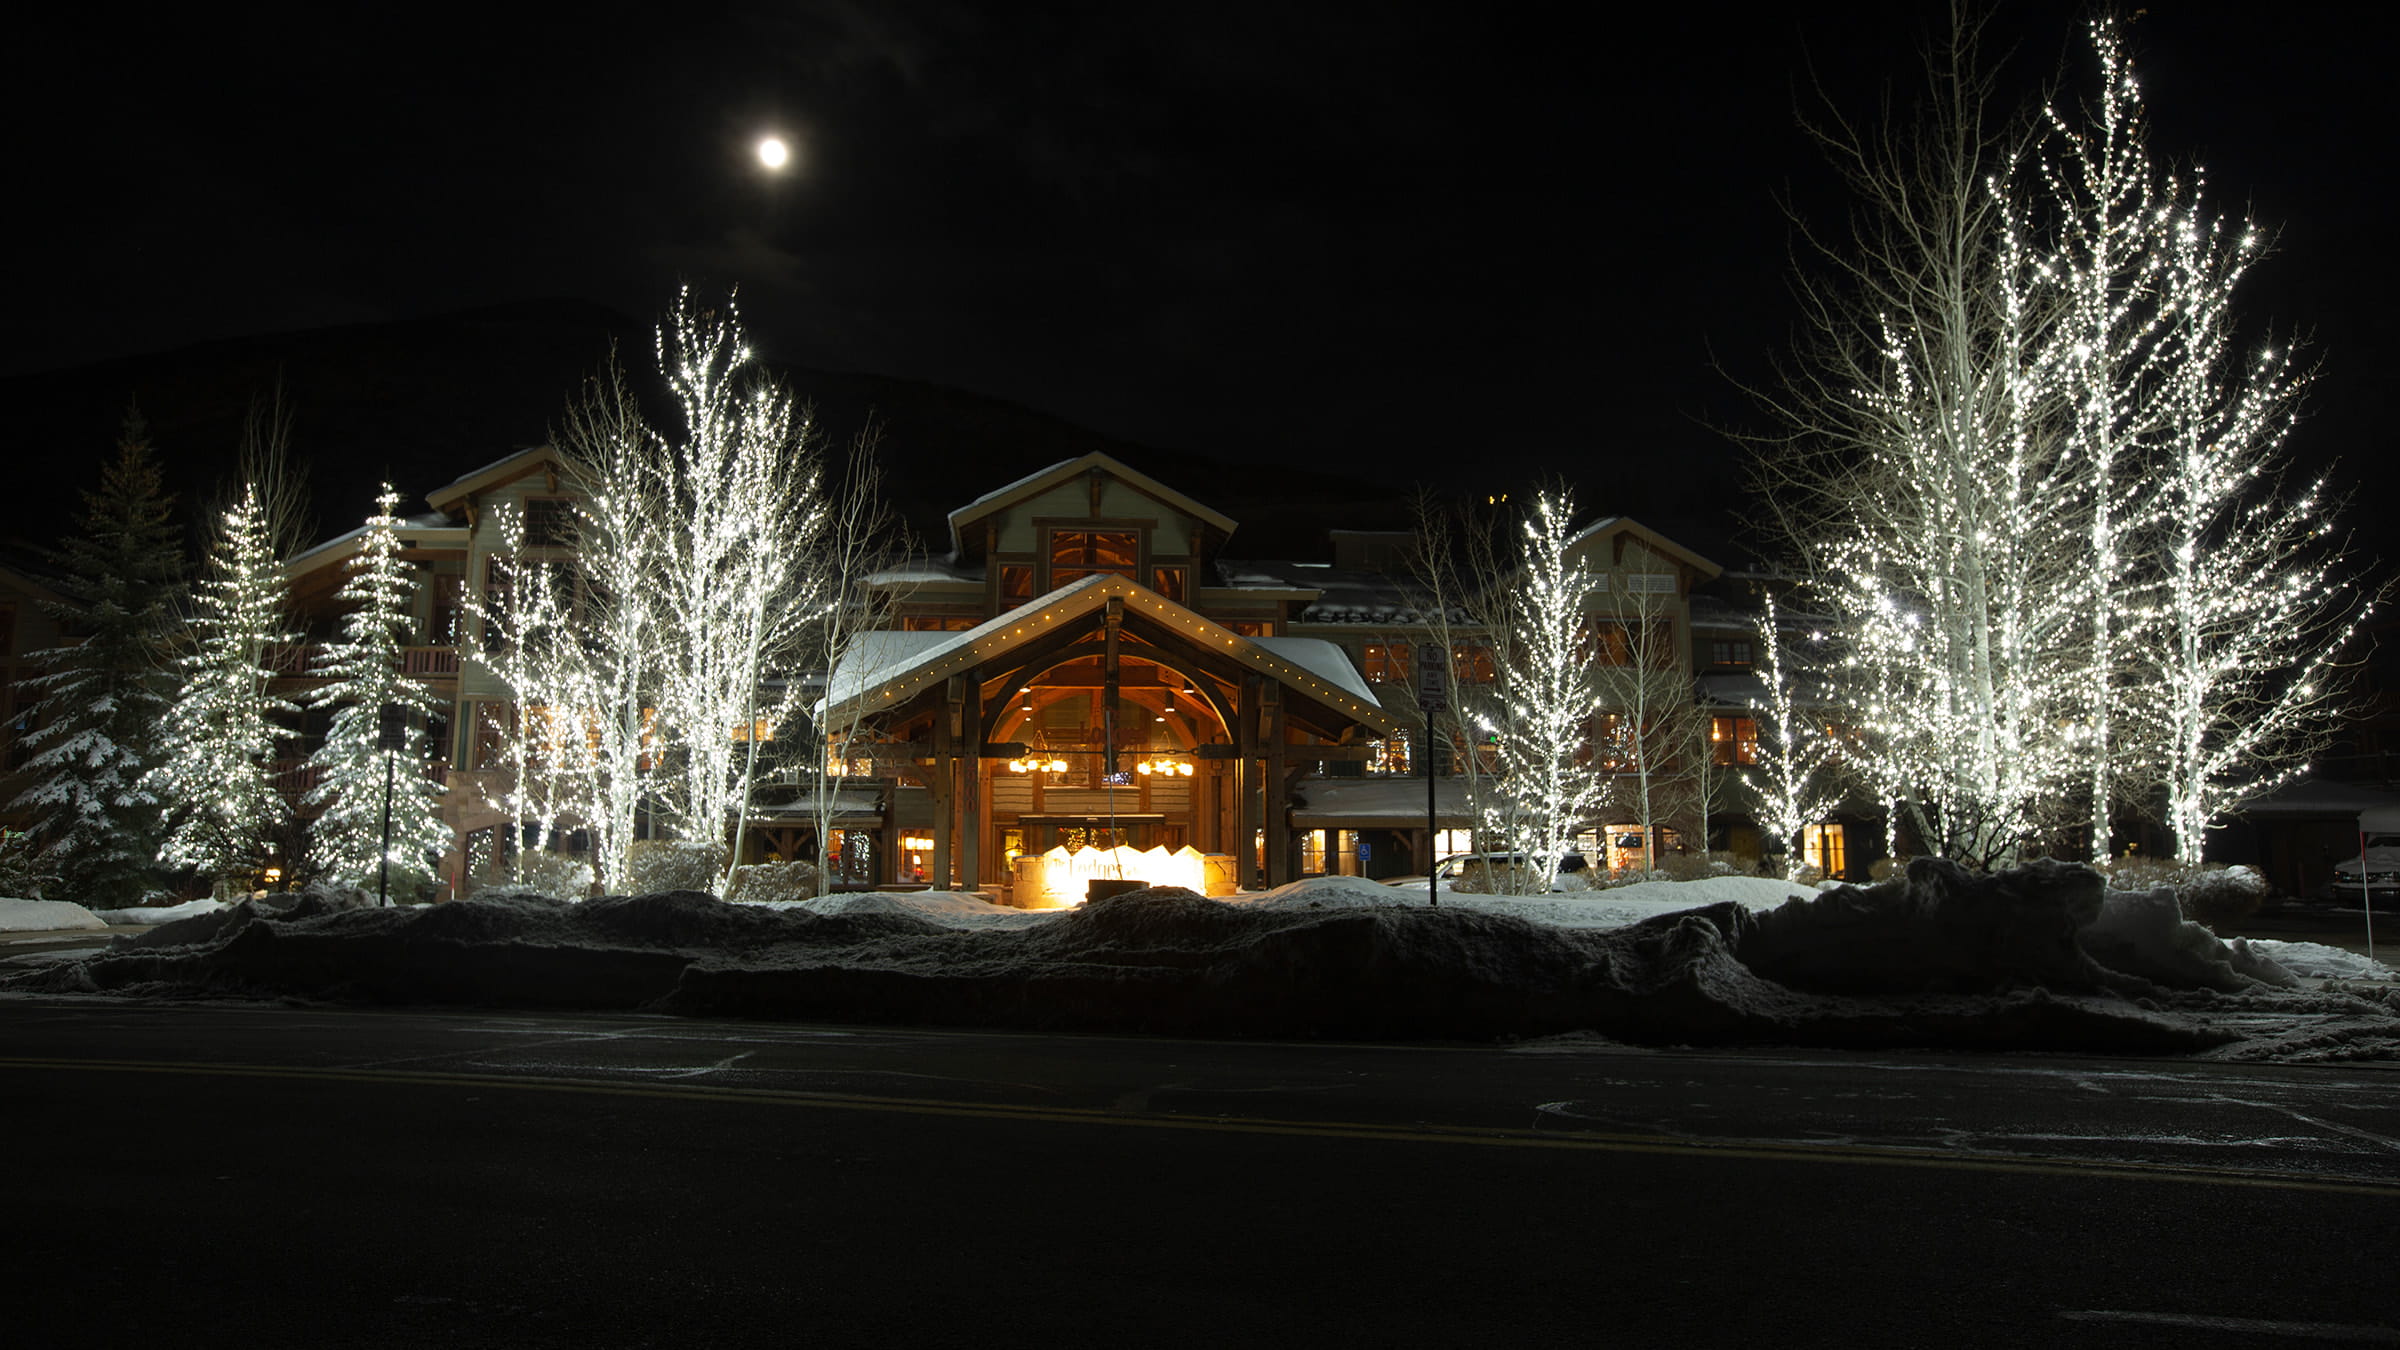 The Lodges at Deer Valley at night during the winter season